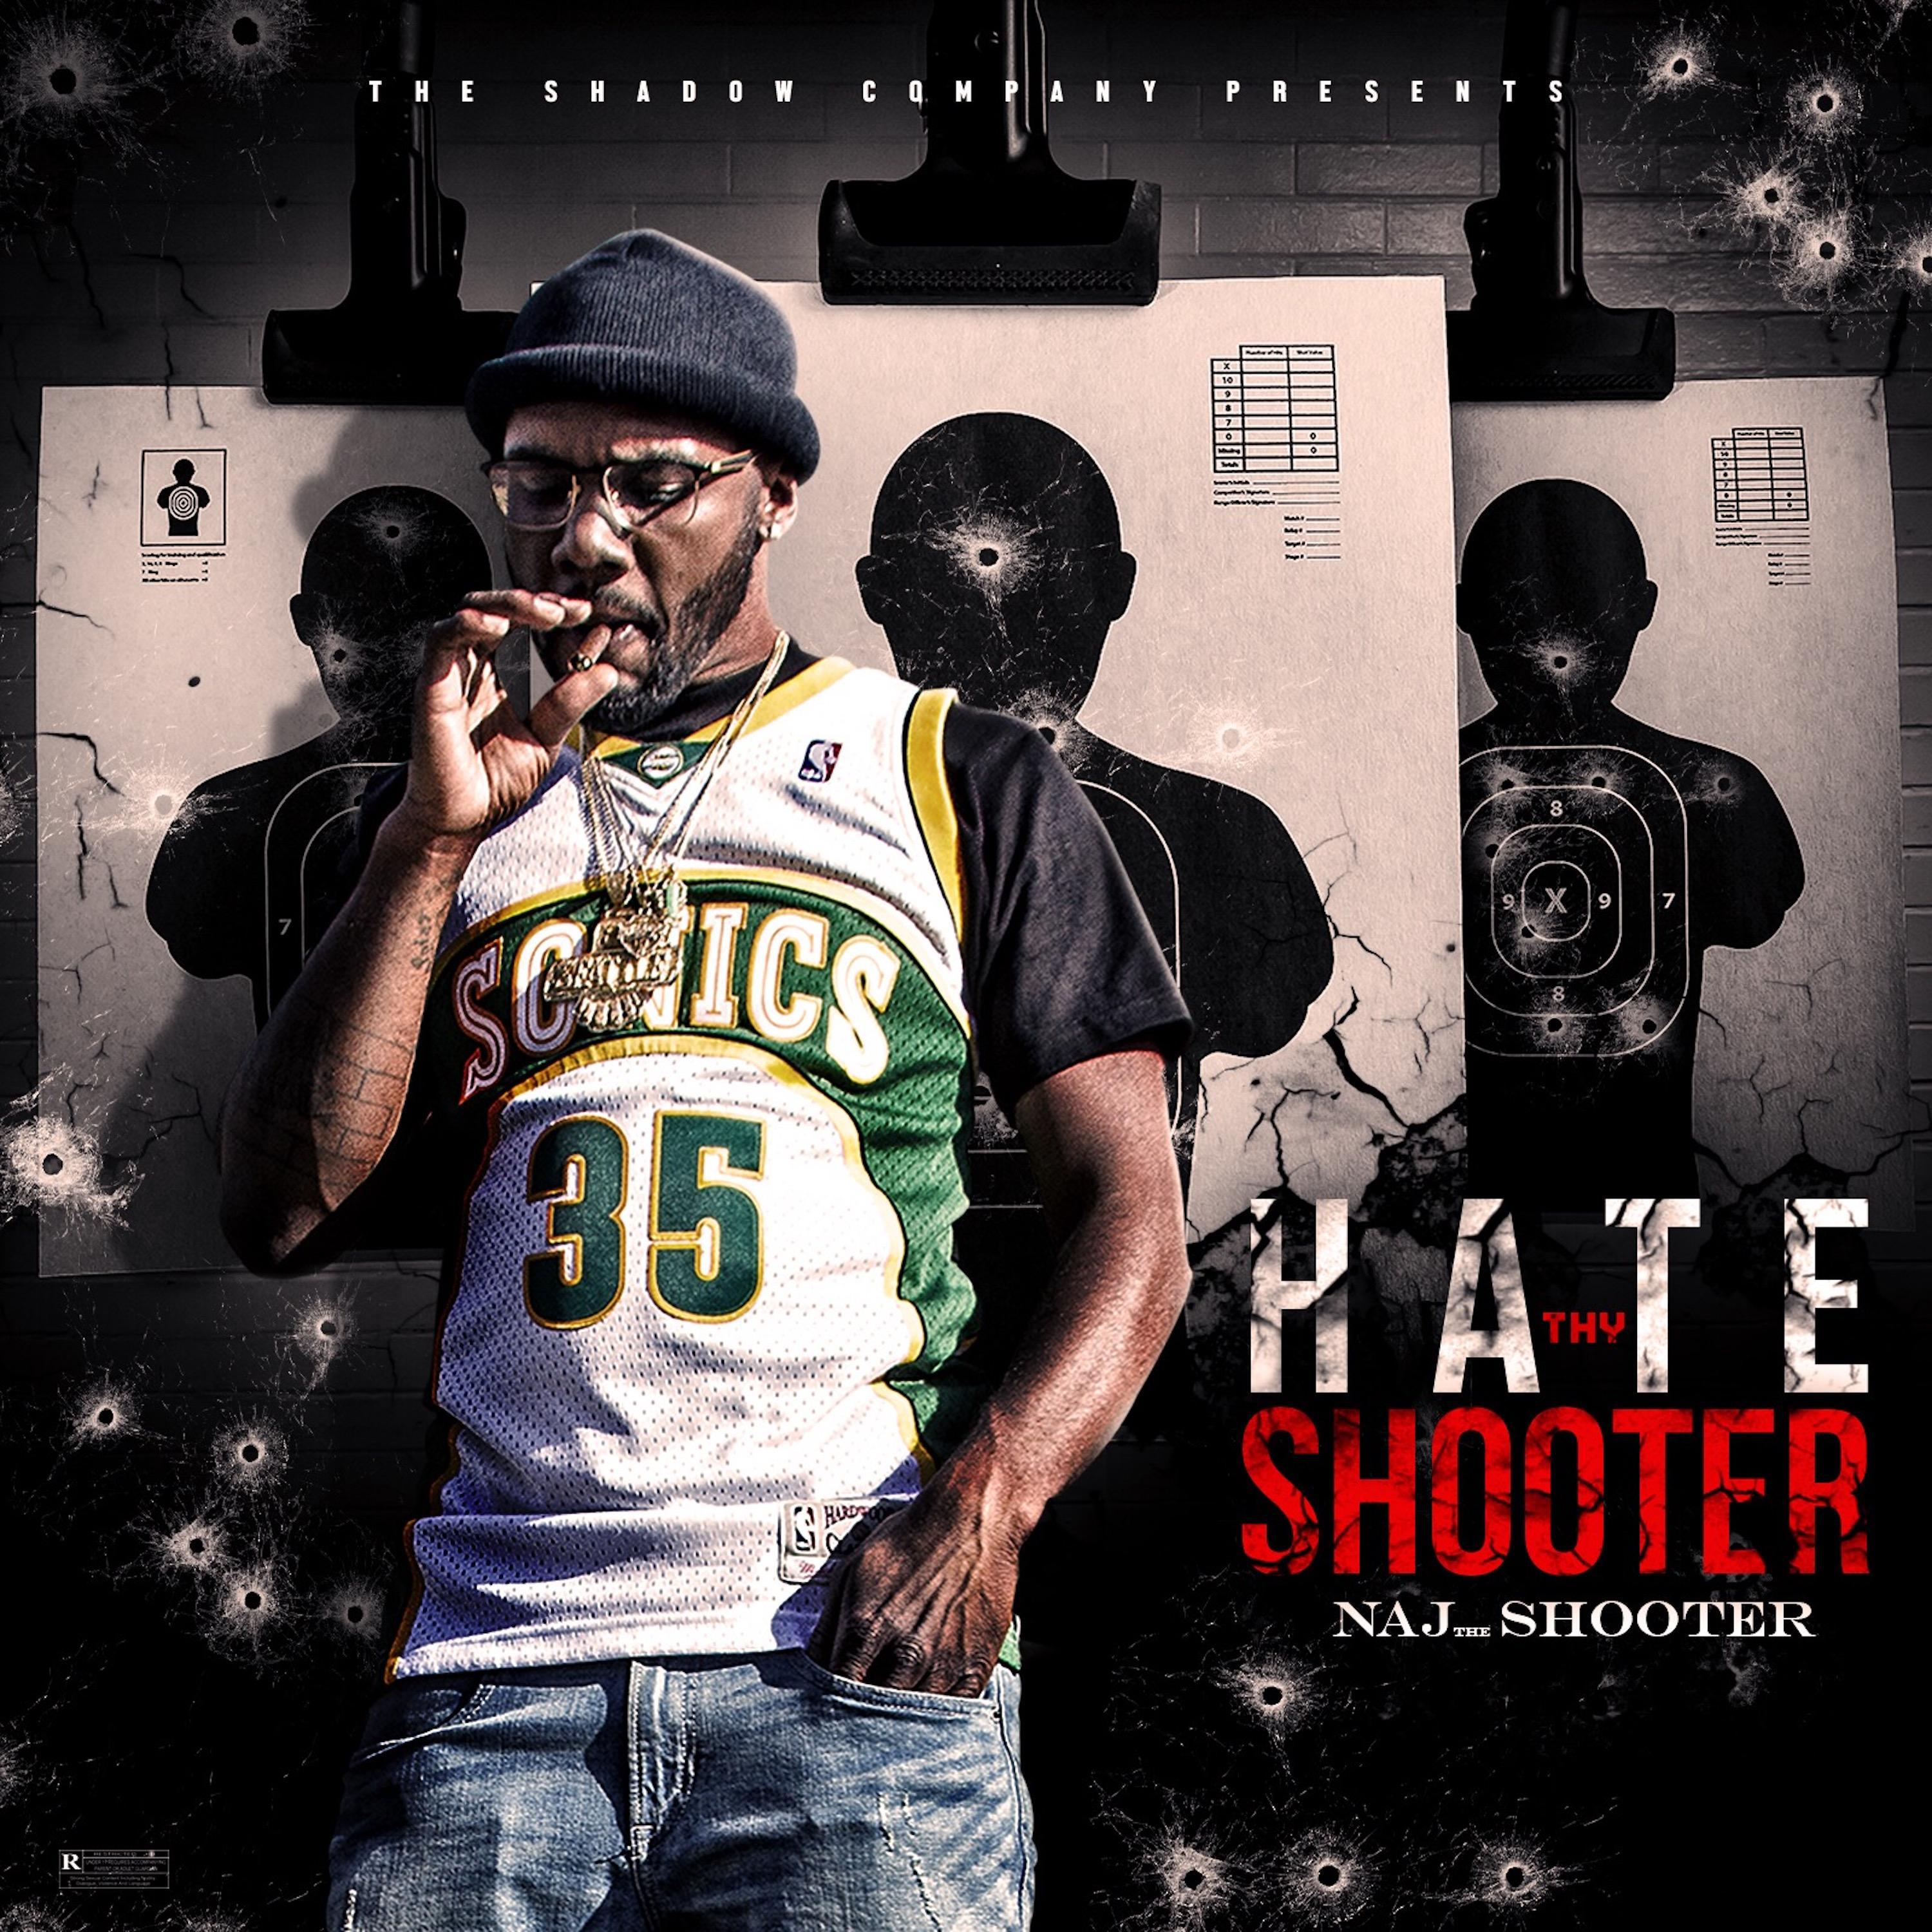 Hate Thy Shooter